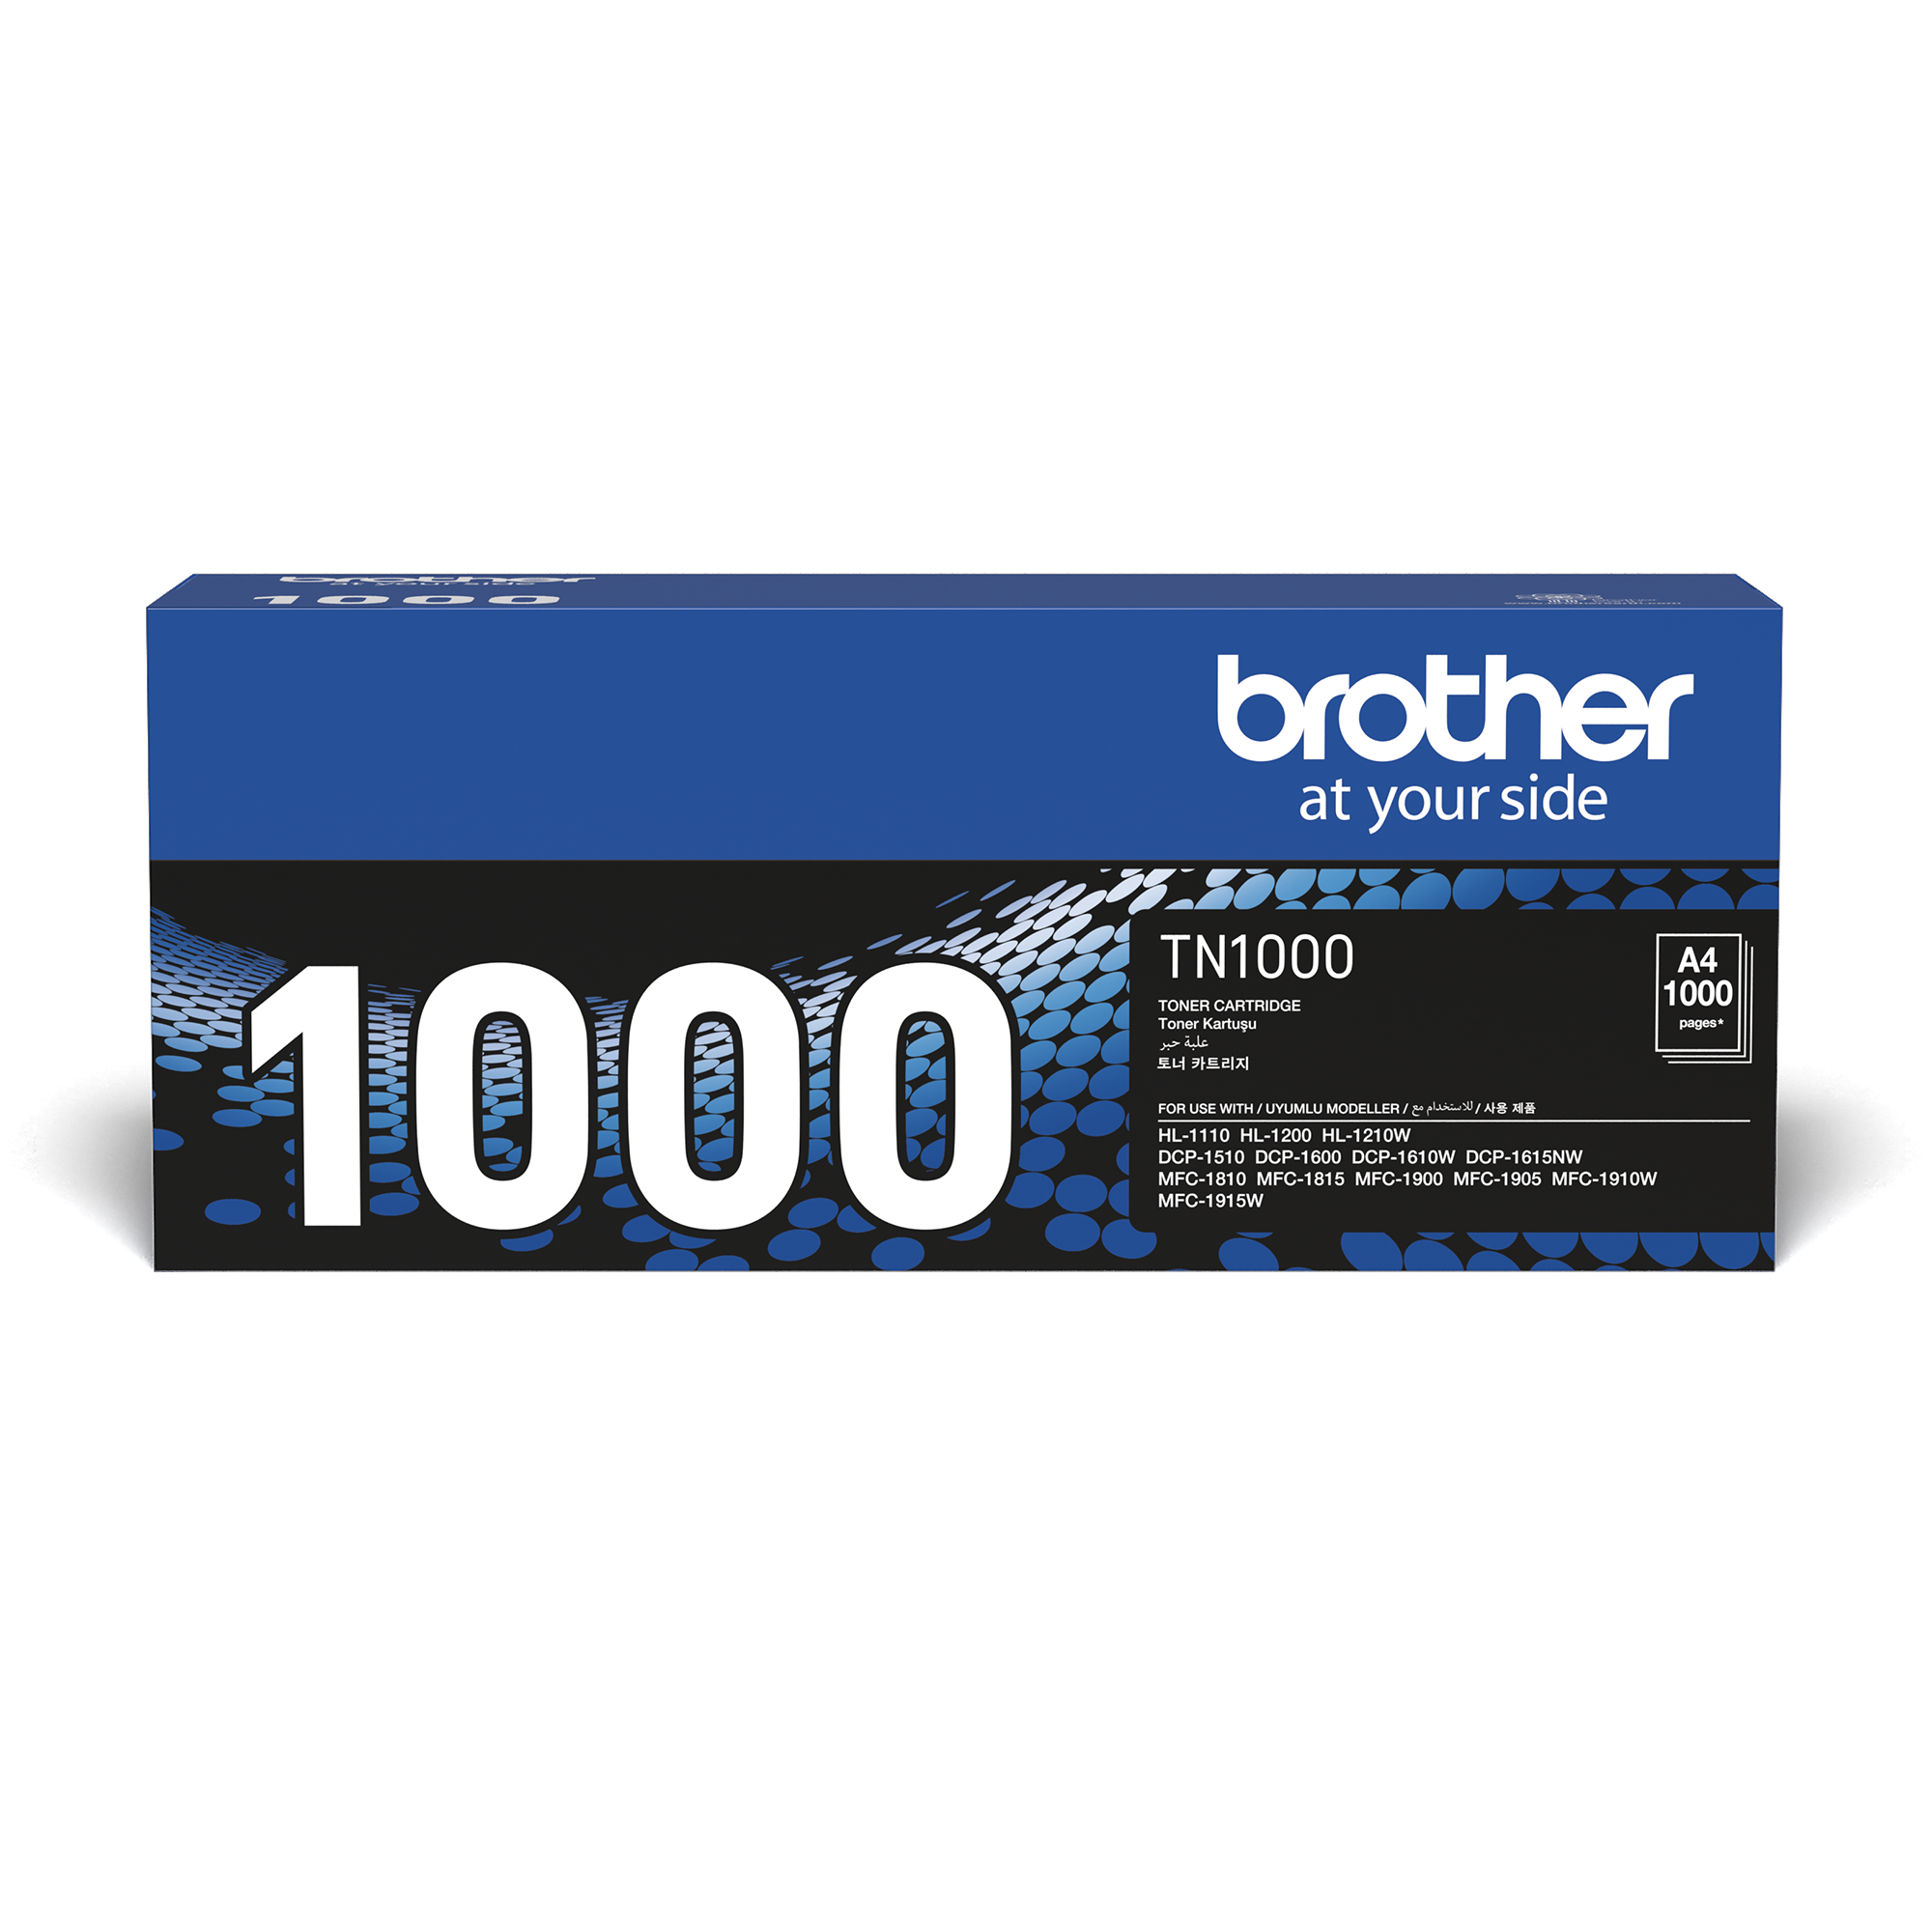 Brother TN-1000 TN-1000 Toner Cartridge (1,000 pages)